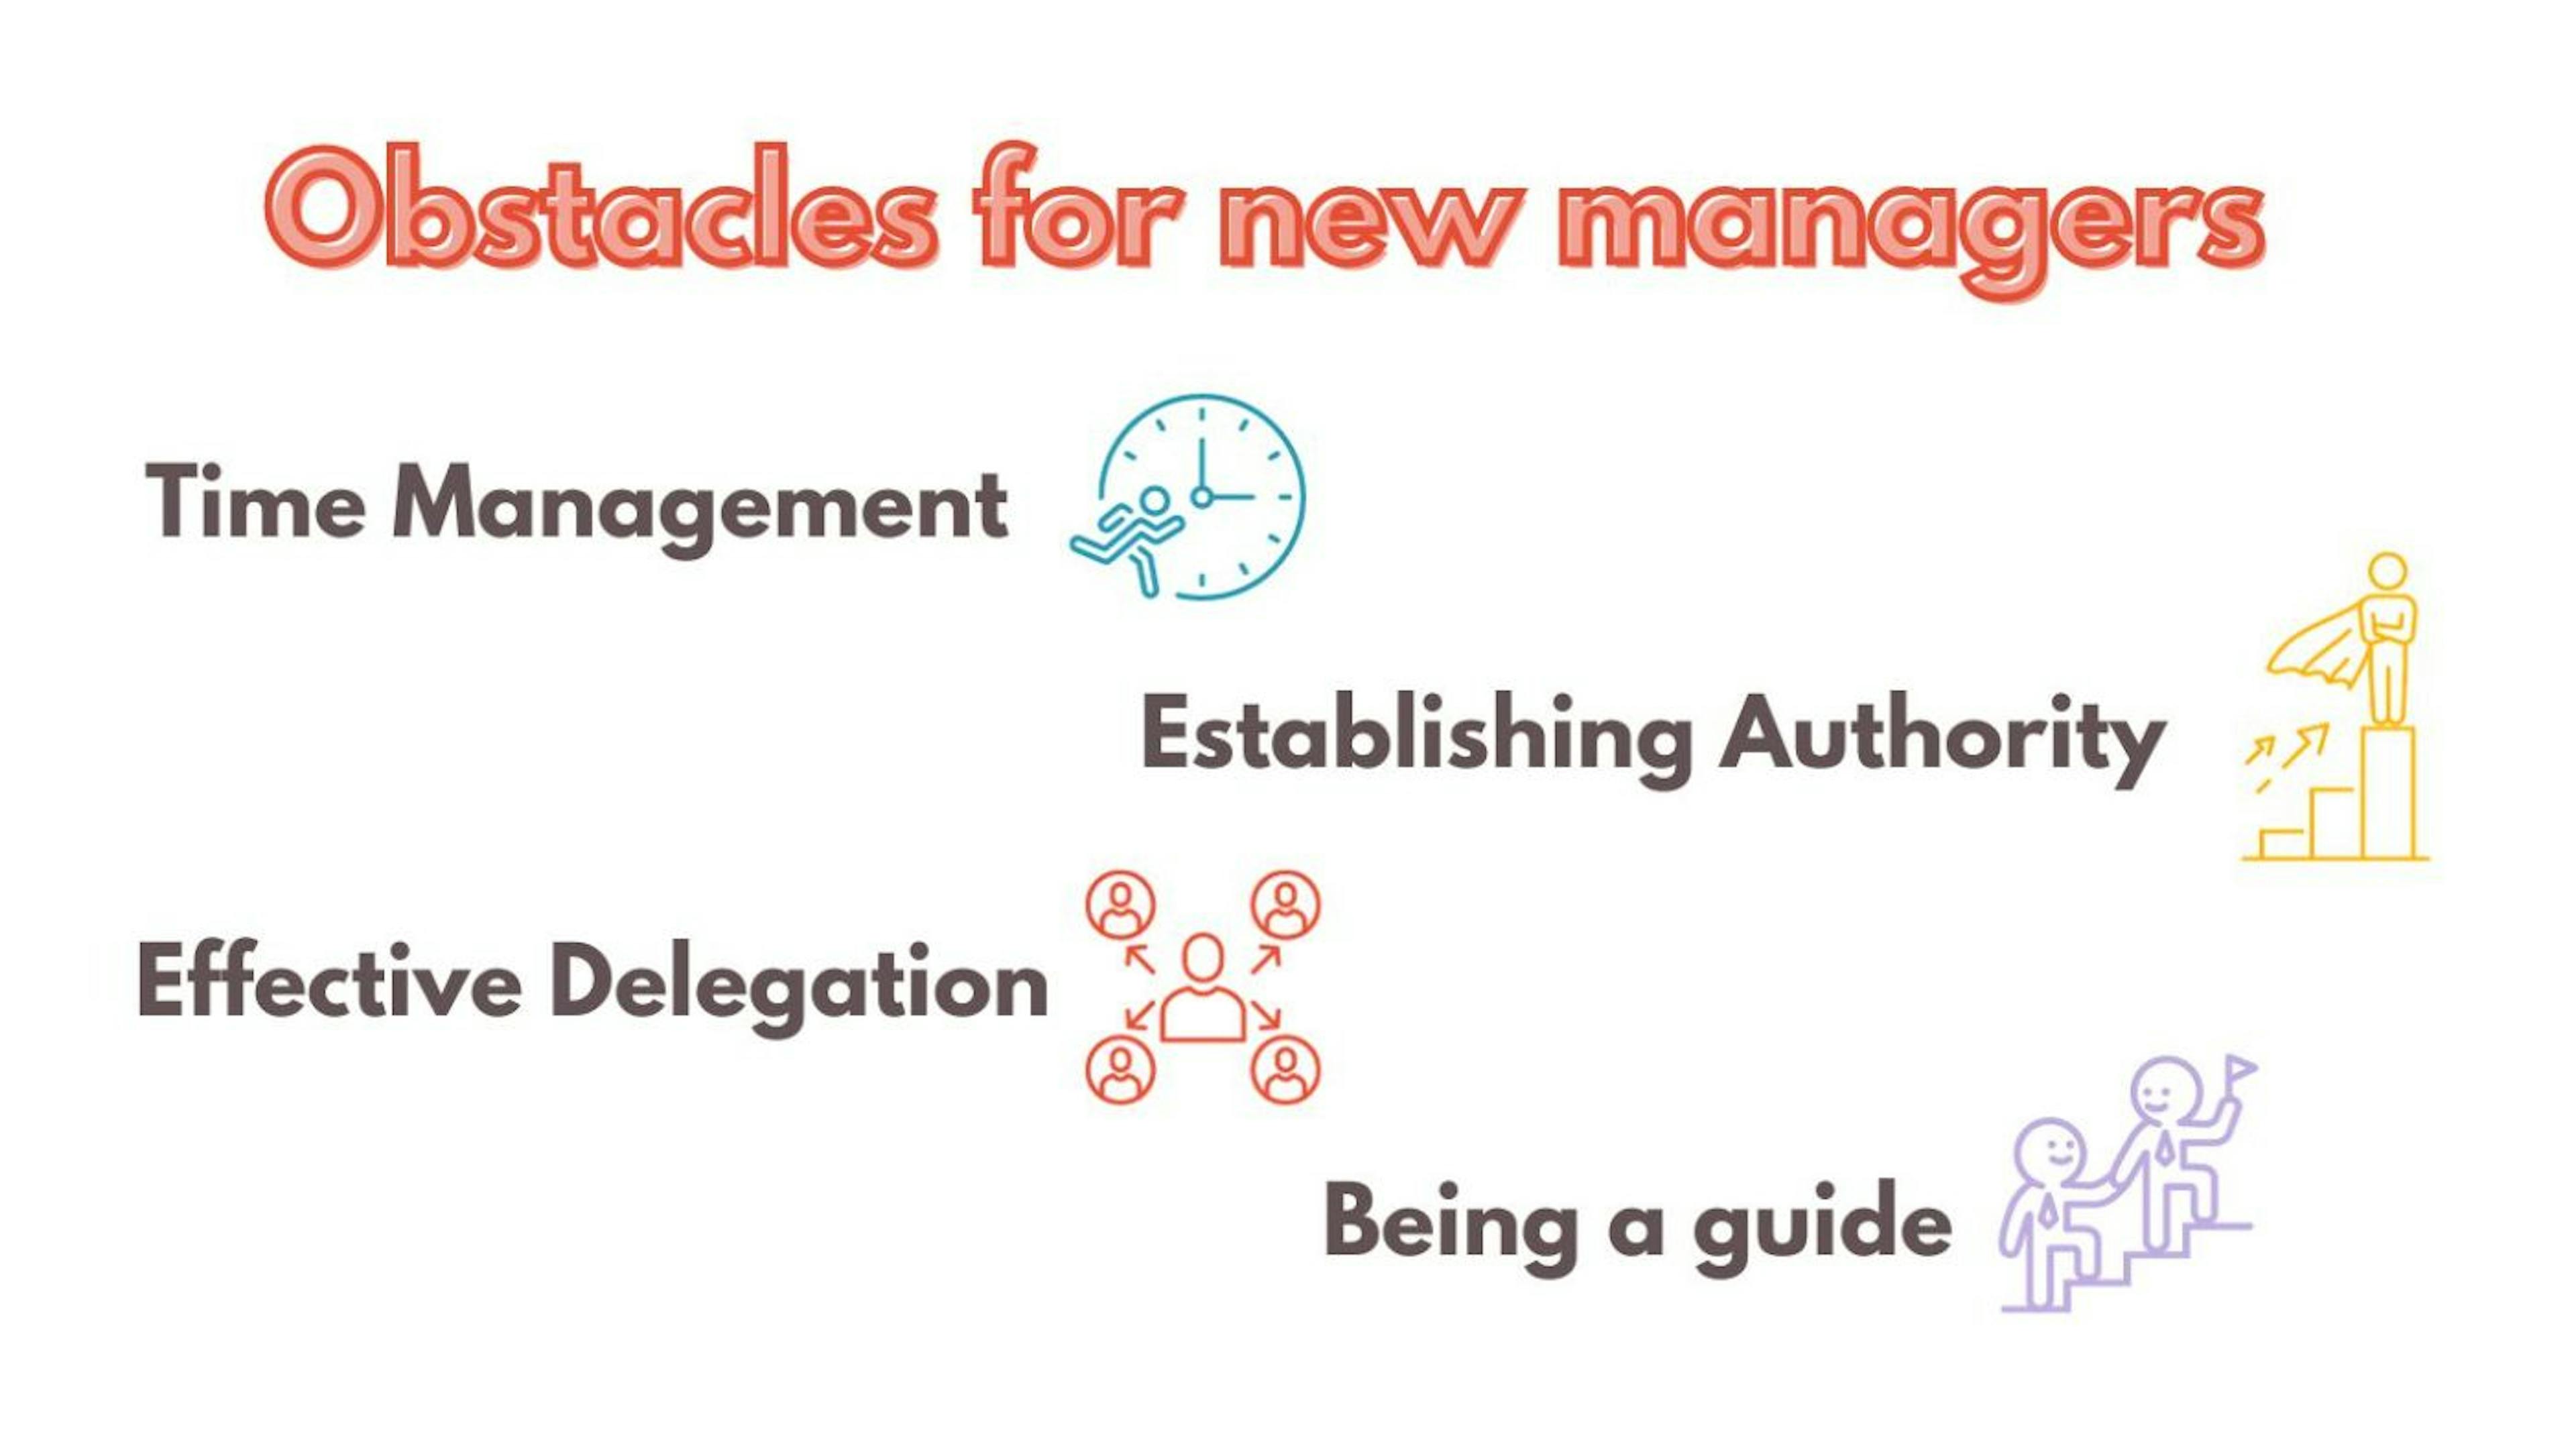 Major challenges for New Managers